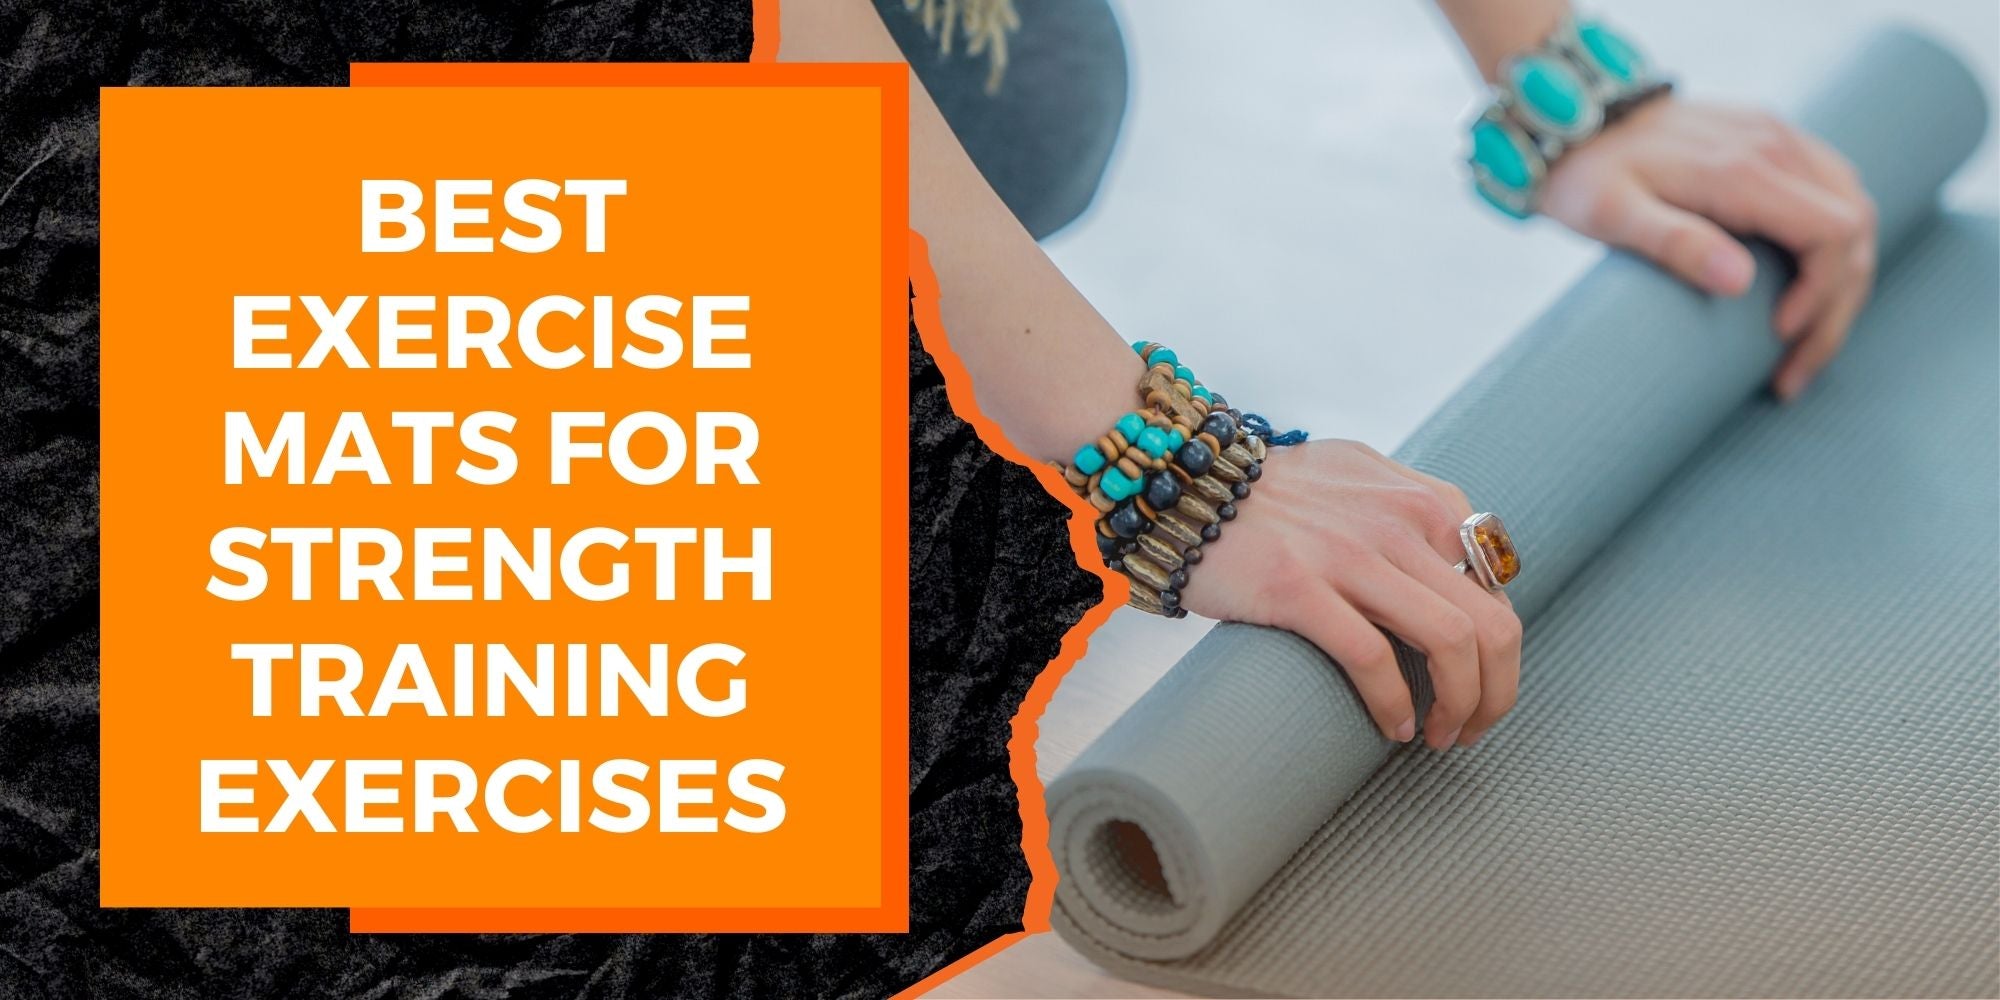 The Best Exercise Mats for Strength Training Exercises